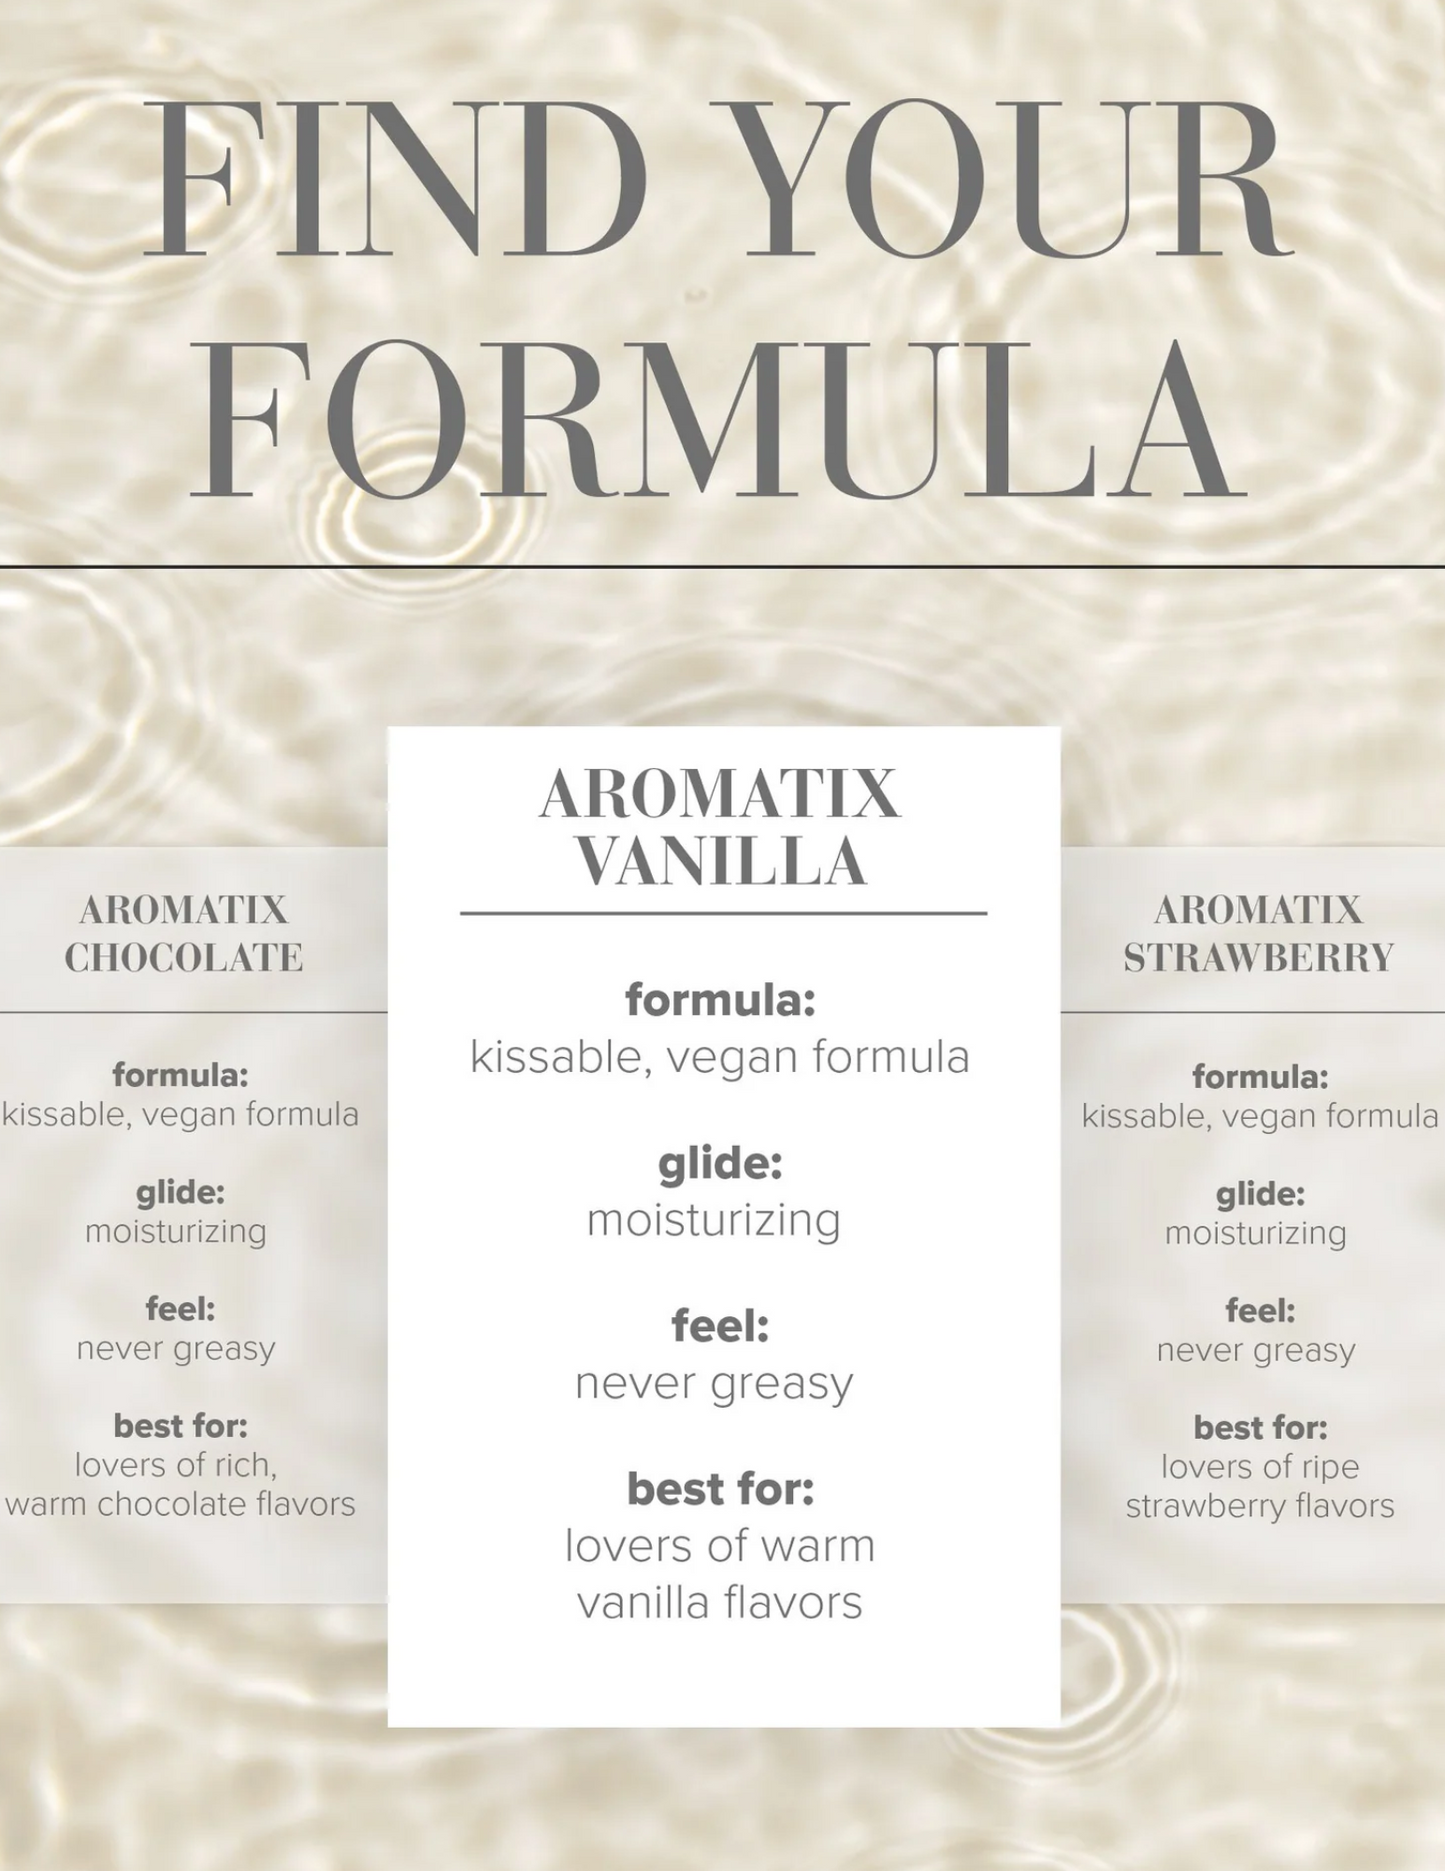 Ad featuring the formula for the System JO Aromatix Vanilla scented massage oil.